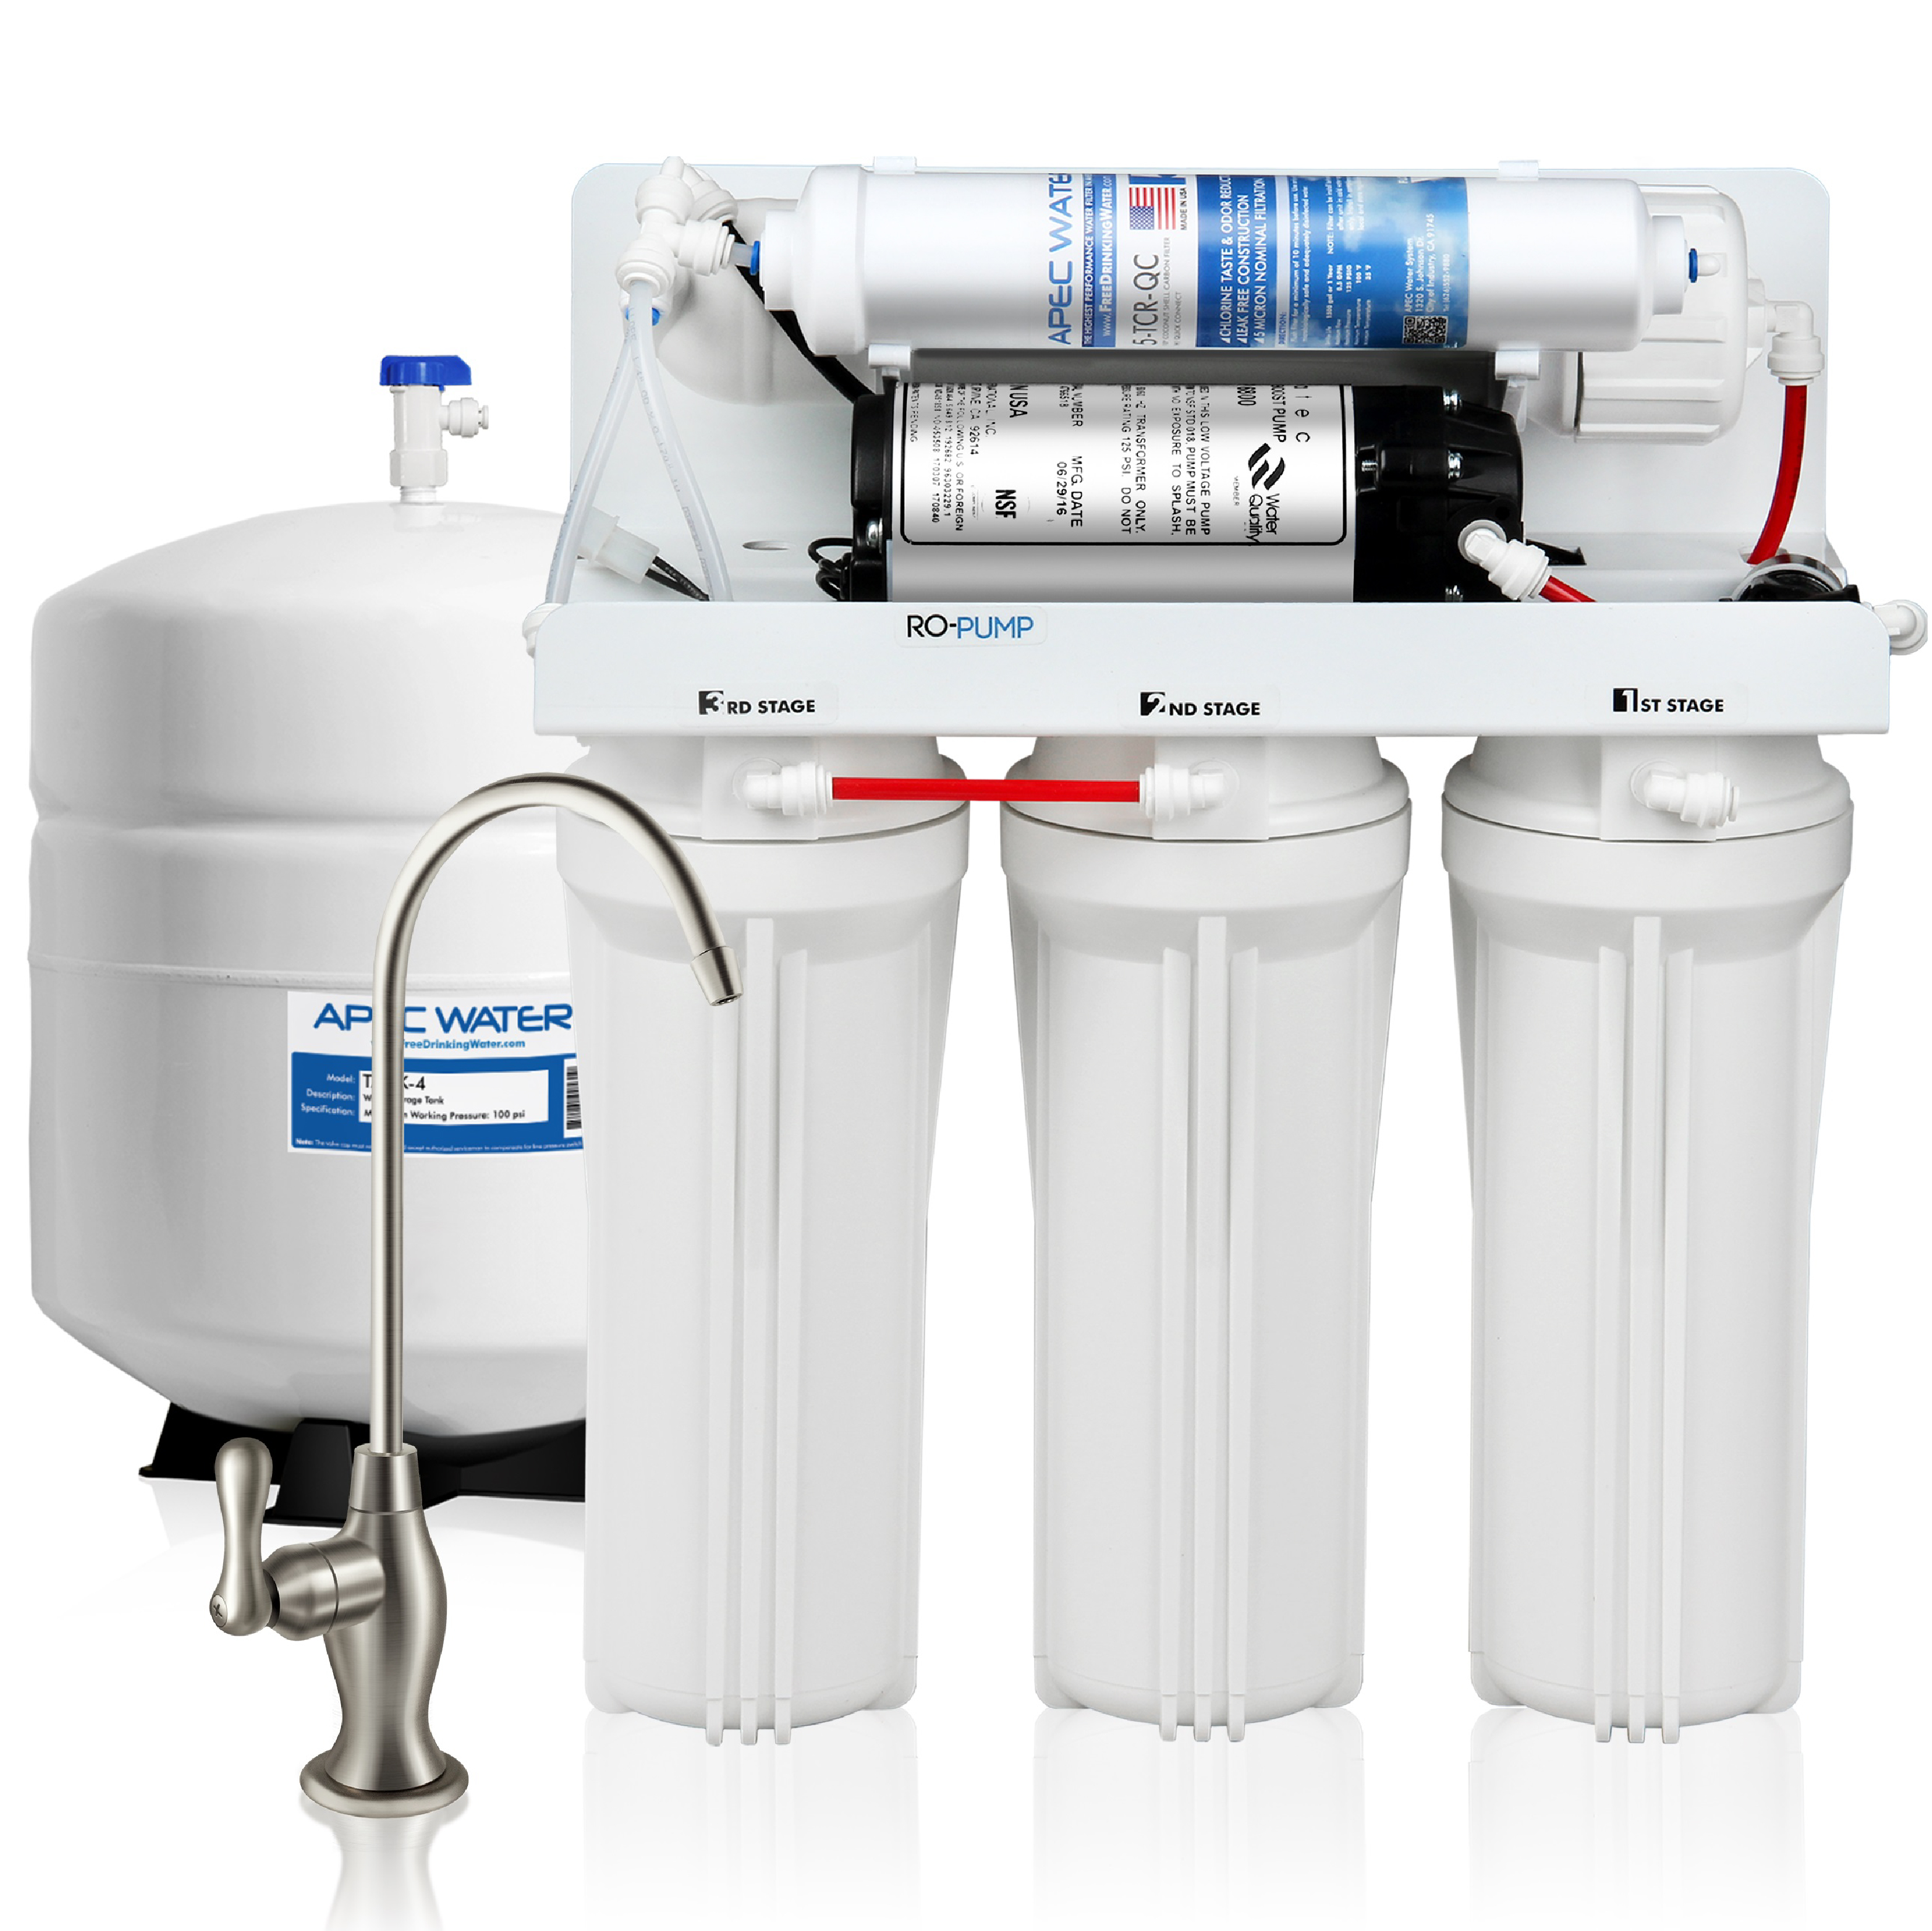 APEC Ultimate Reverse Osmosis Drinking Water Filtration System with Booster Pump for Very Low Pressure Homes (RO-PUMP) - image 1 of 12